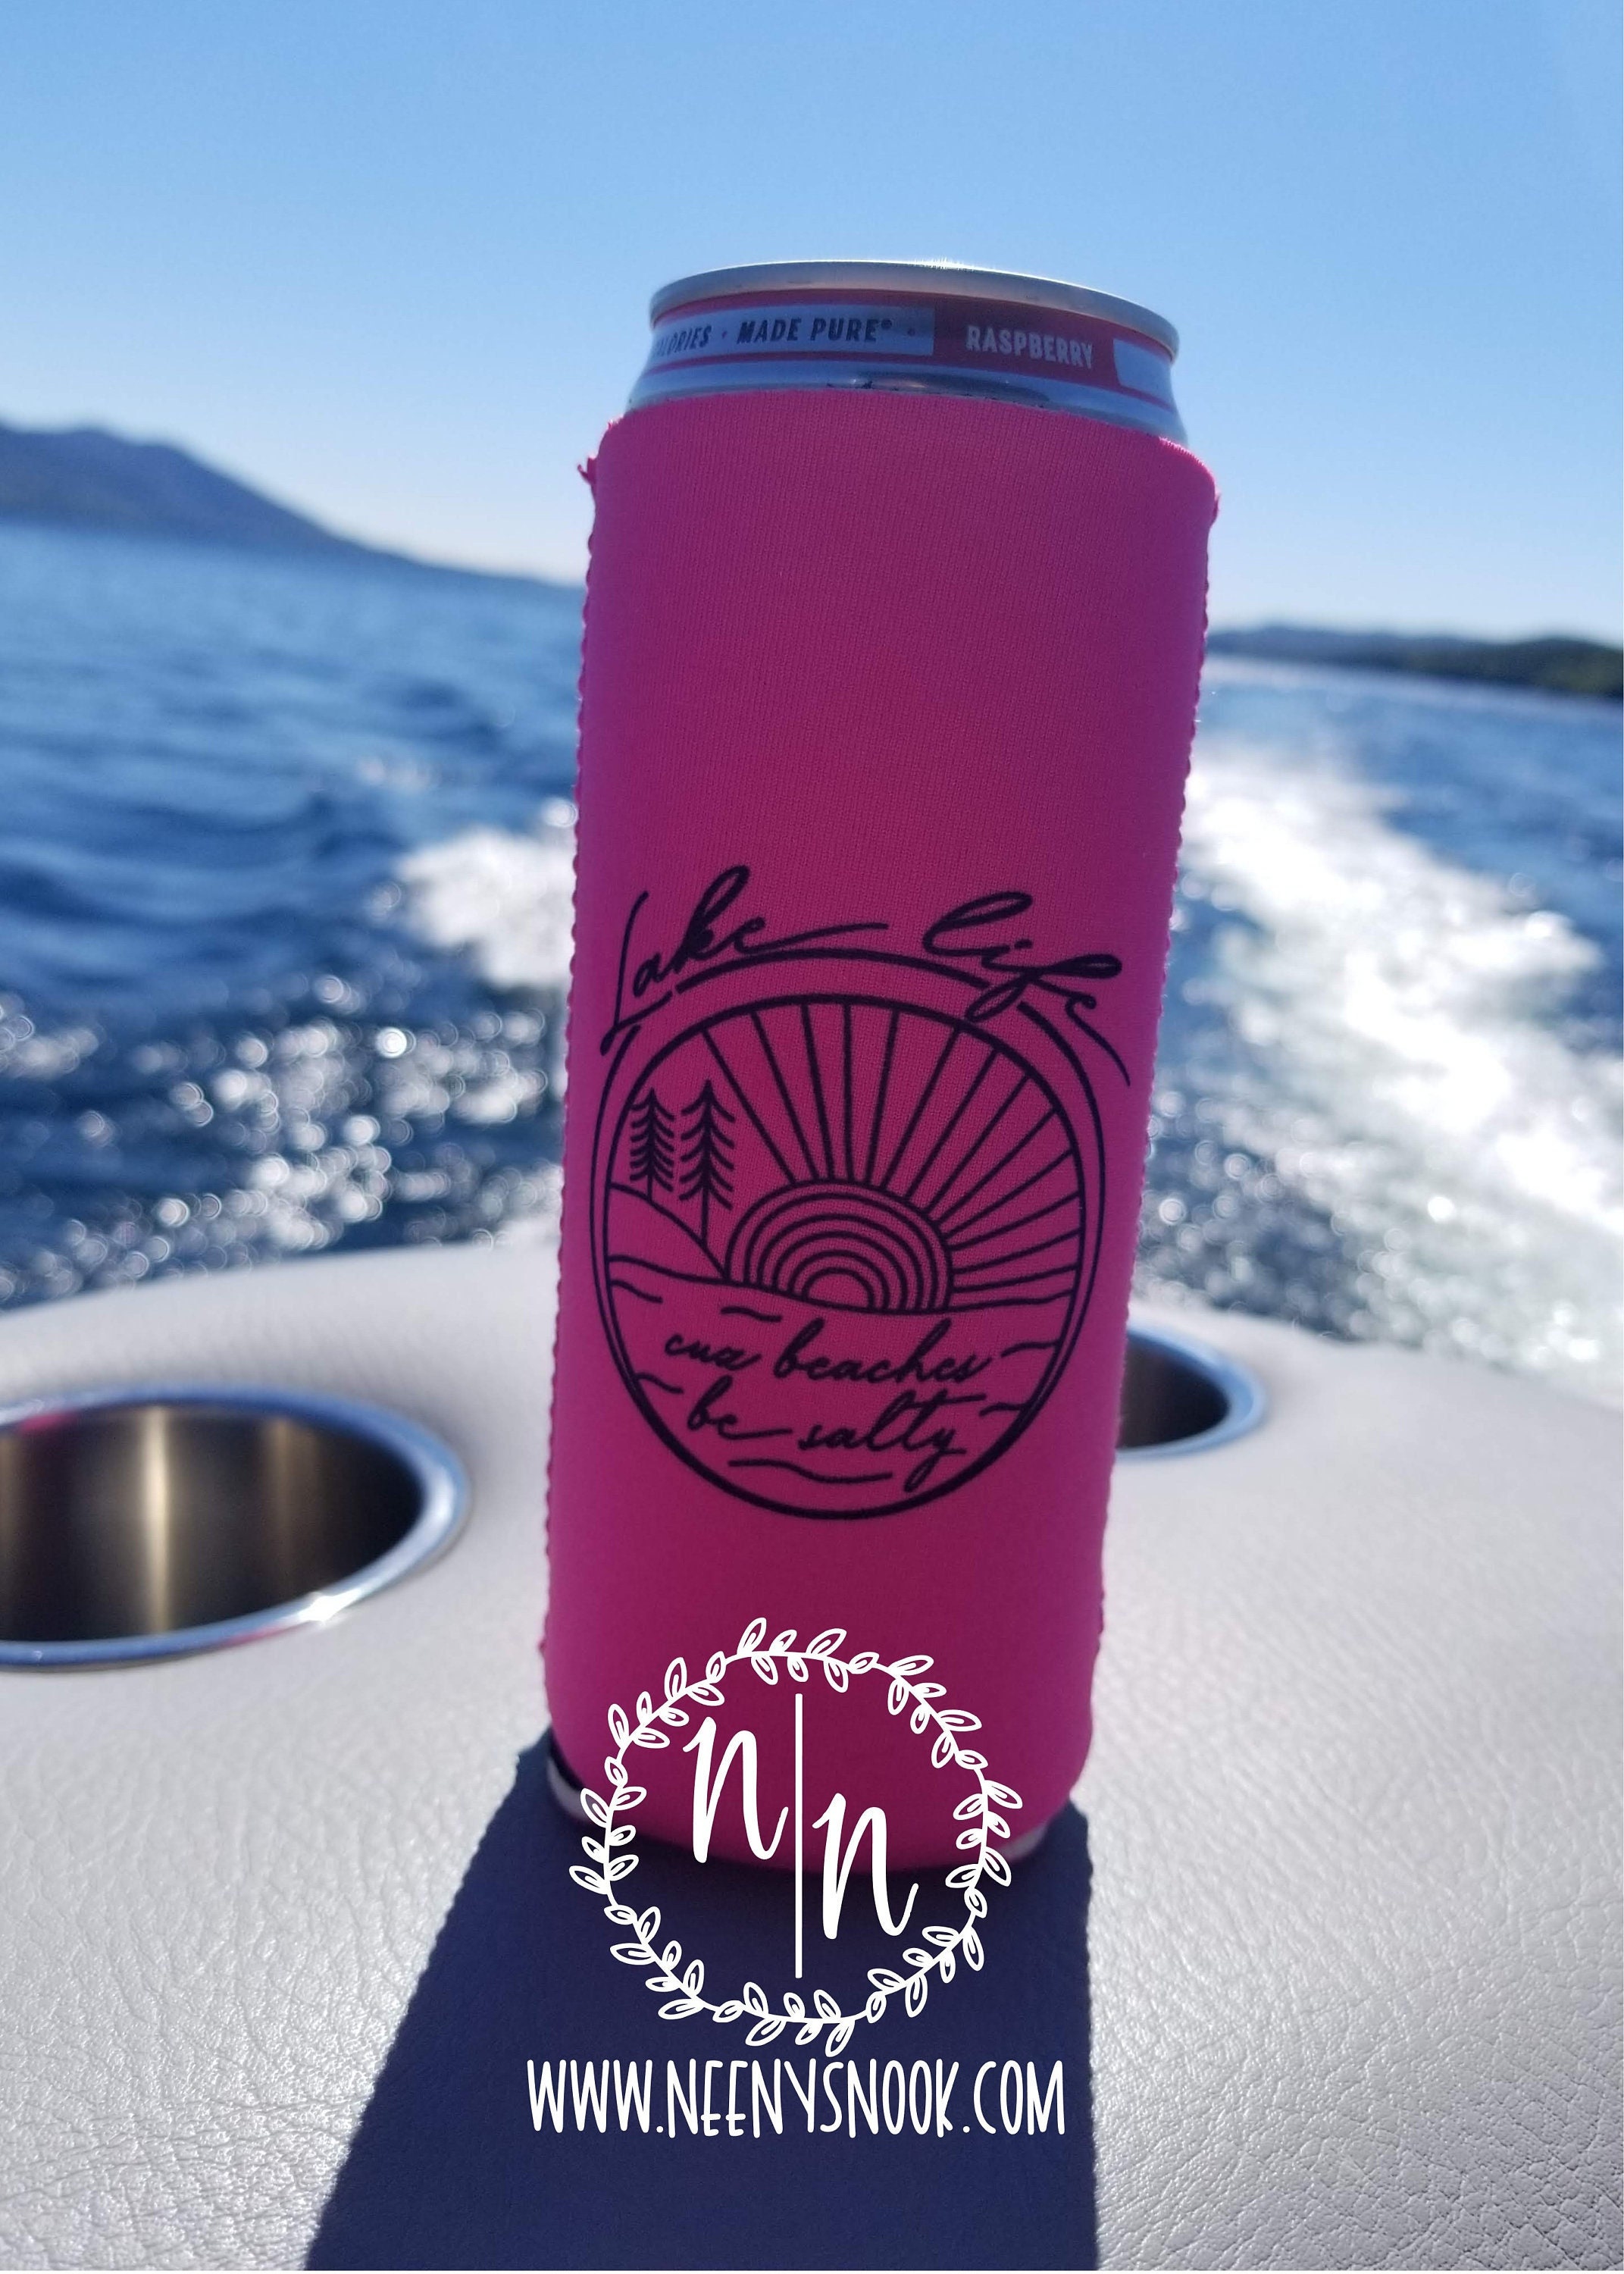 Koozie White Claw Can Holder Insulated Neoprene Cooler for Slim 12